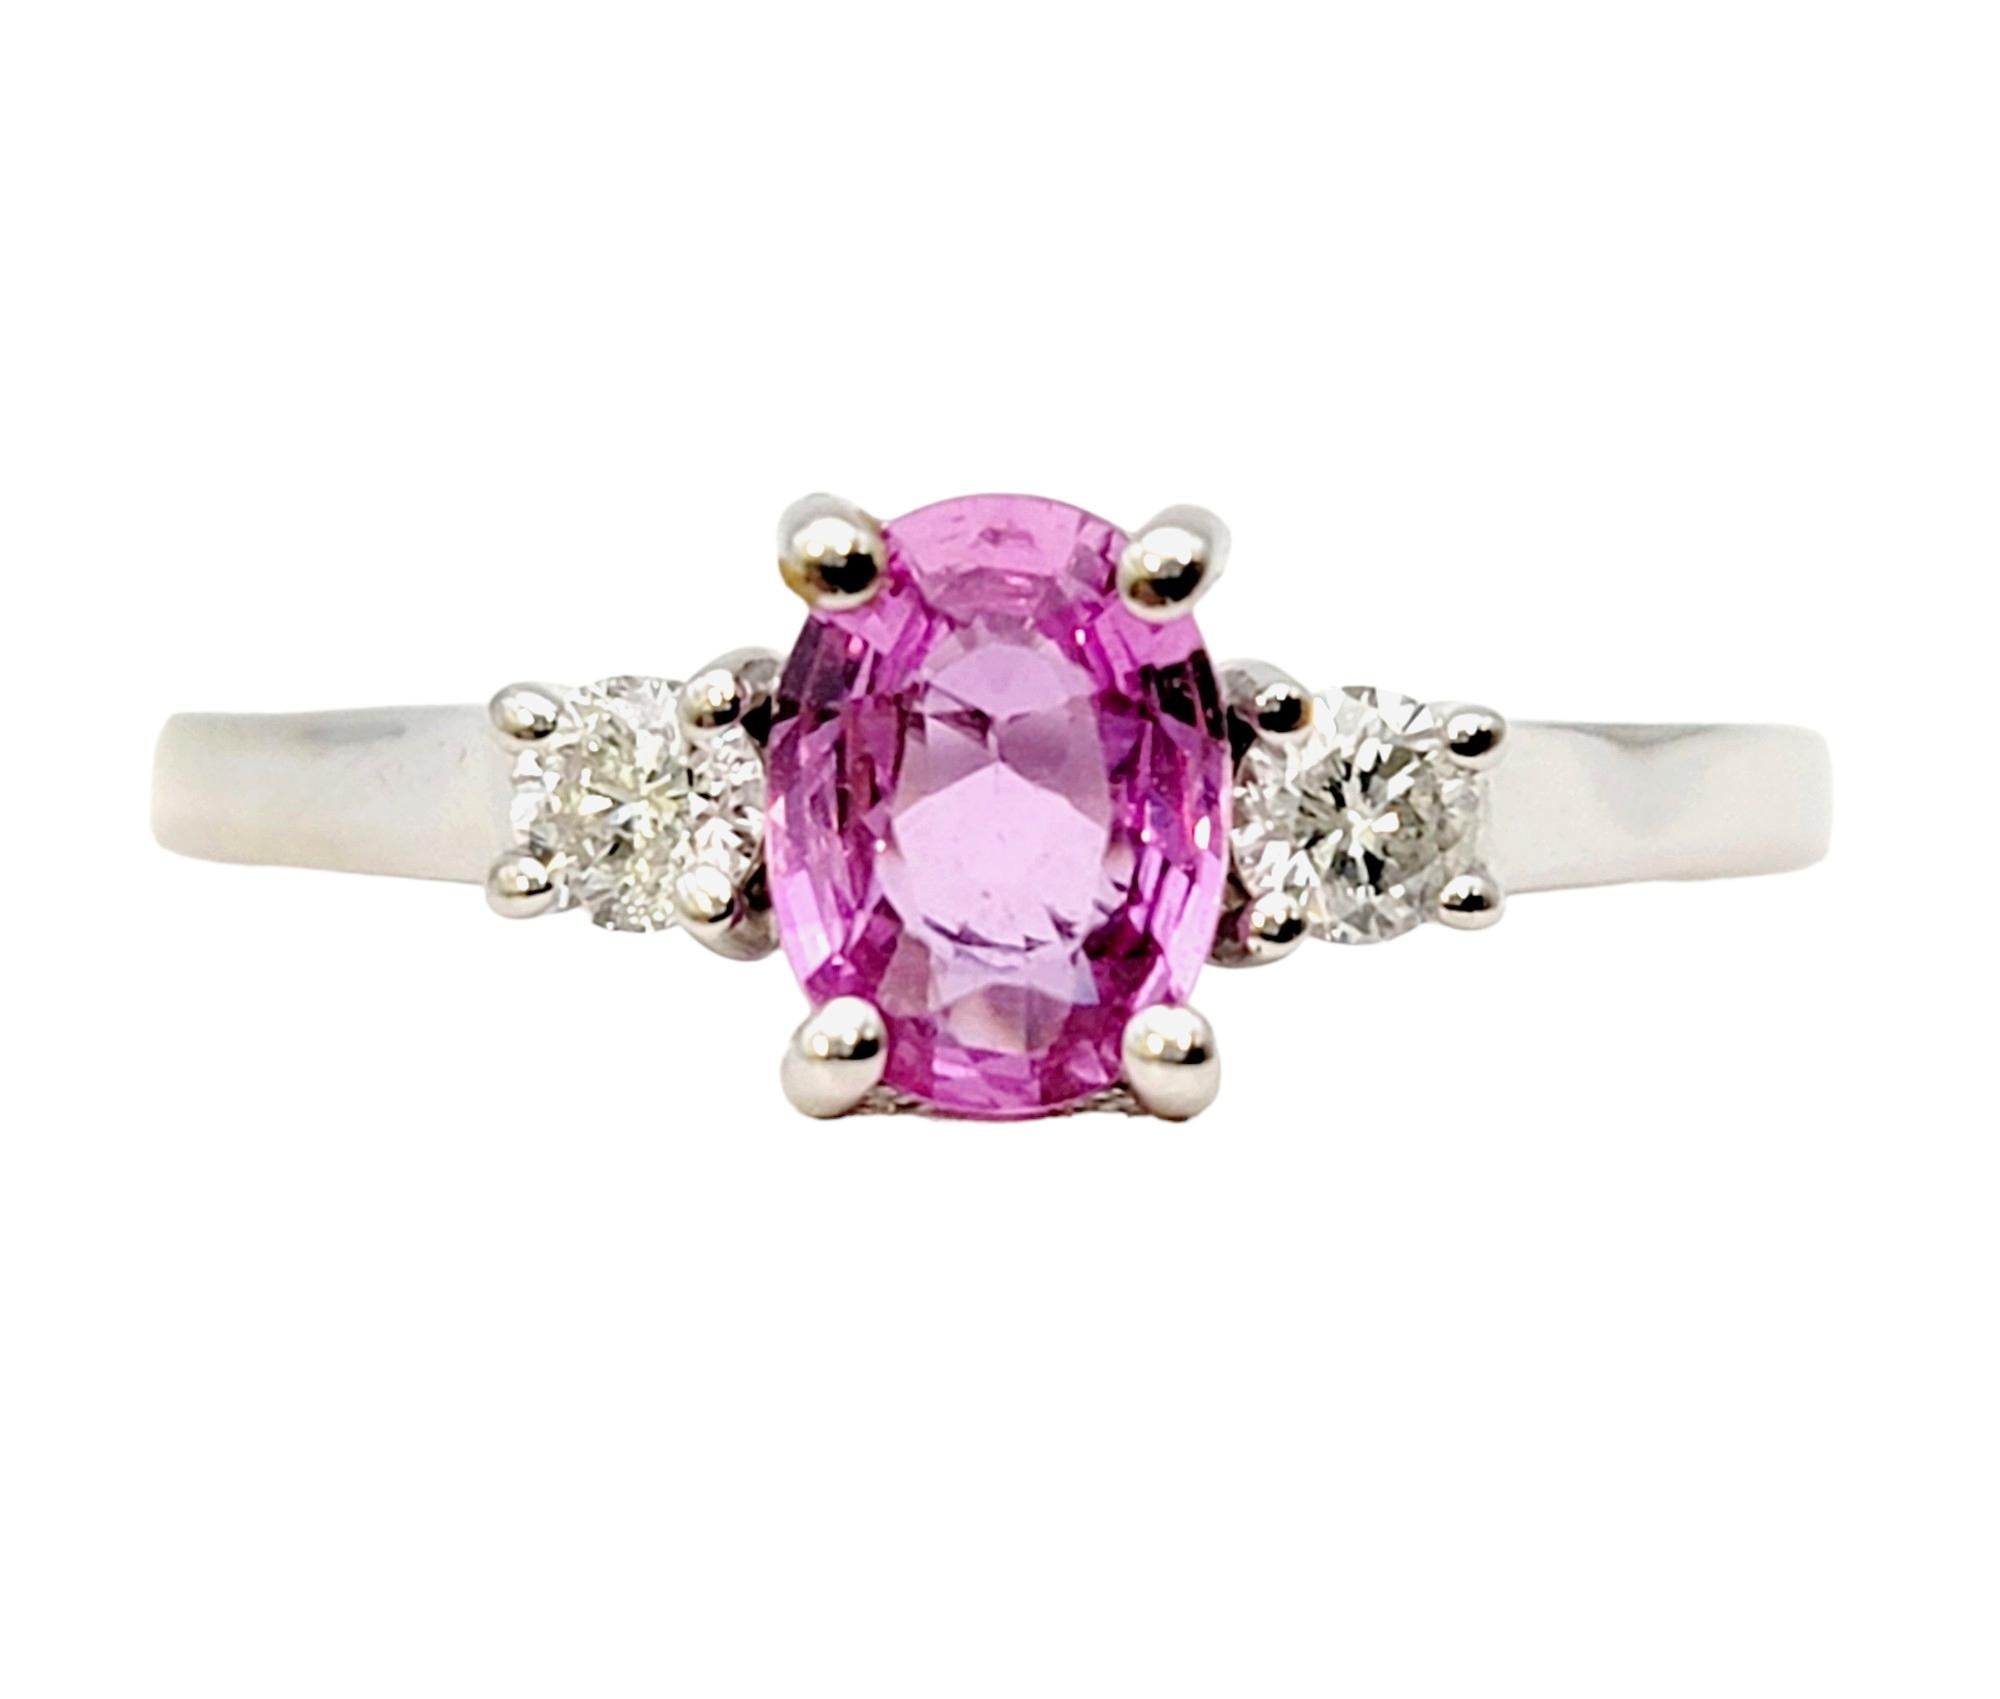 Ring size: 8.75

Pretty in pink! This beautiful three stone ring from Effy combines the allure of pink sapphires, sparkling diamonds, and luxurious 14K white gold to create a true timeless treasure.

The center stone of this gorgeous ring boasts a